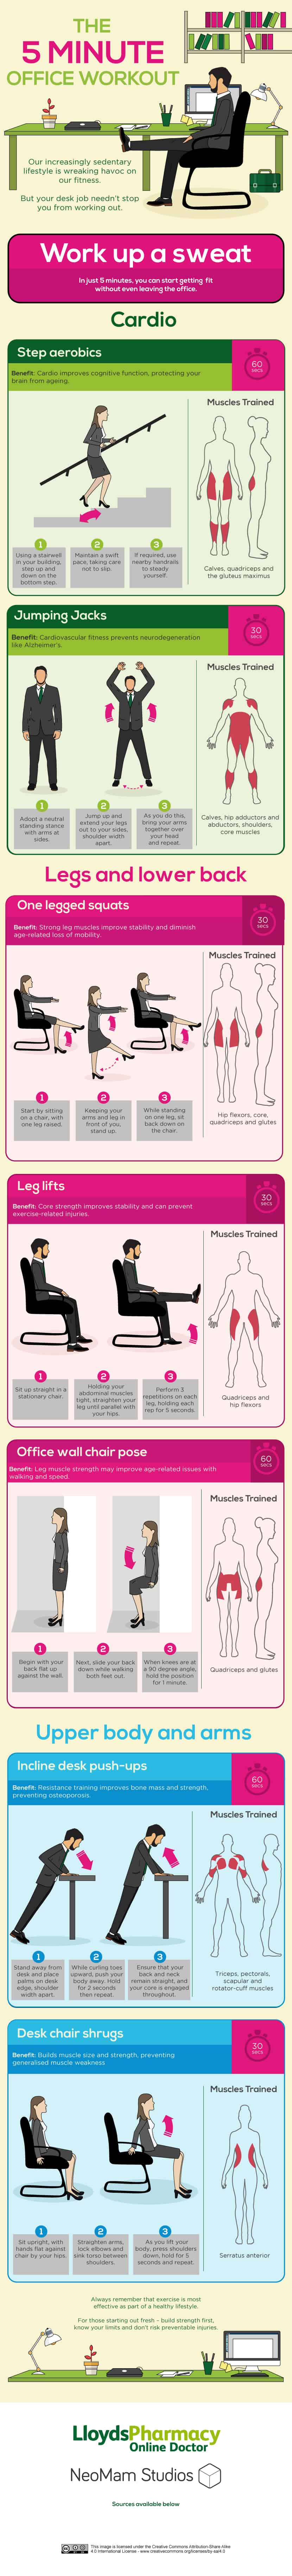 The 5 Minute Office Workout Daily Infographic